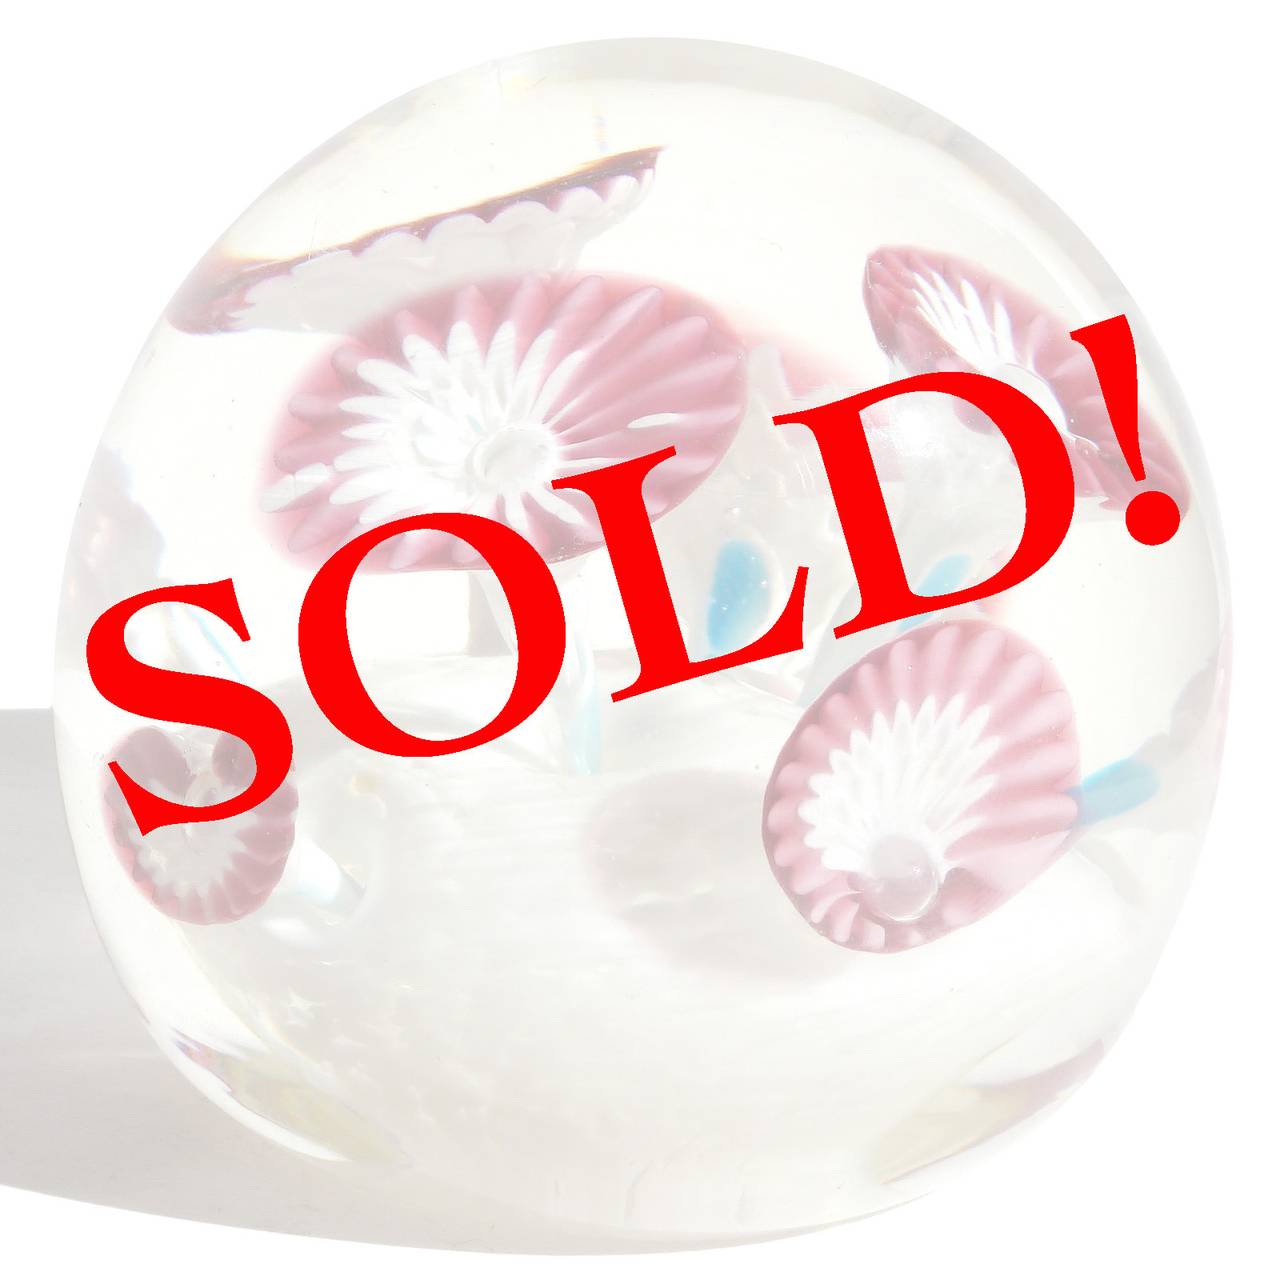 FREE Shipping Worldwide! See details below description.

Beautiful and unique Murano art glass decorative paperweights in pink tones. The pieces are documented to the Fratelli Toso Company, and one documented to designer Alfredo Barbini, all in a